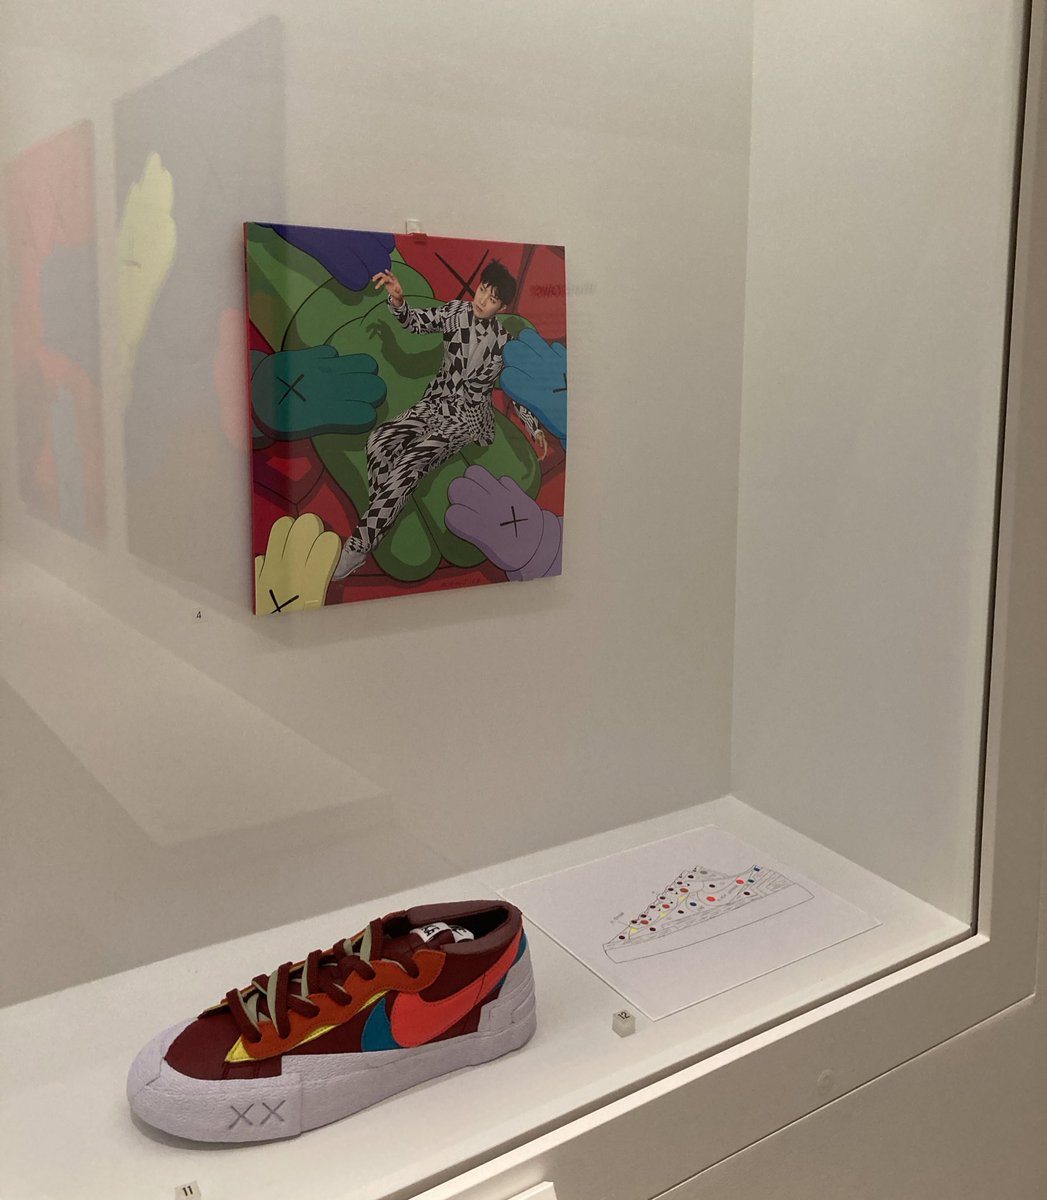 .@BTS_twt j-hope’s #JackInTheBox Album cover by KAWS is displaying in KAWS: FAMILY exhibition at @agotoronto (one of the largest art museums in North America). I was happy and surprised! 🤩